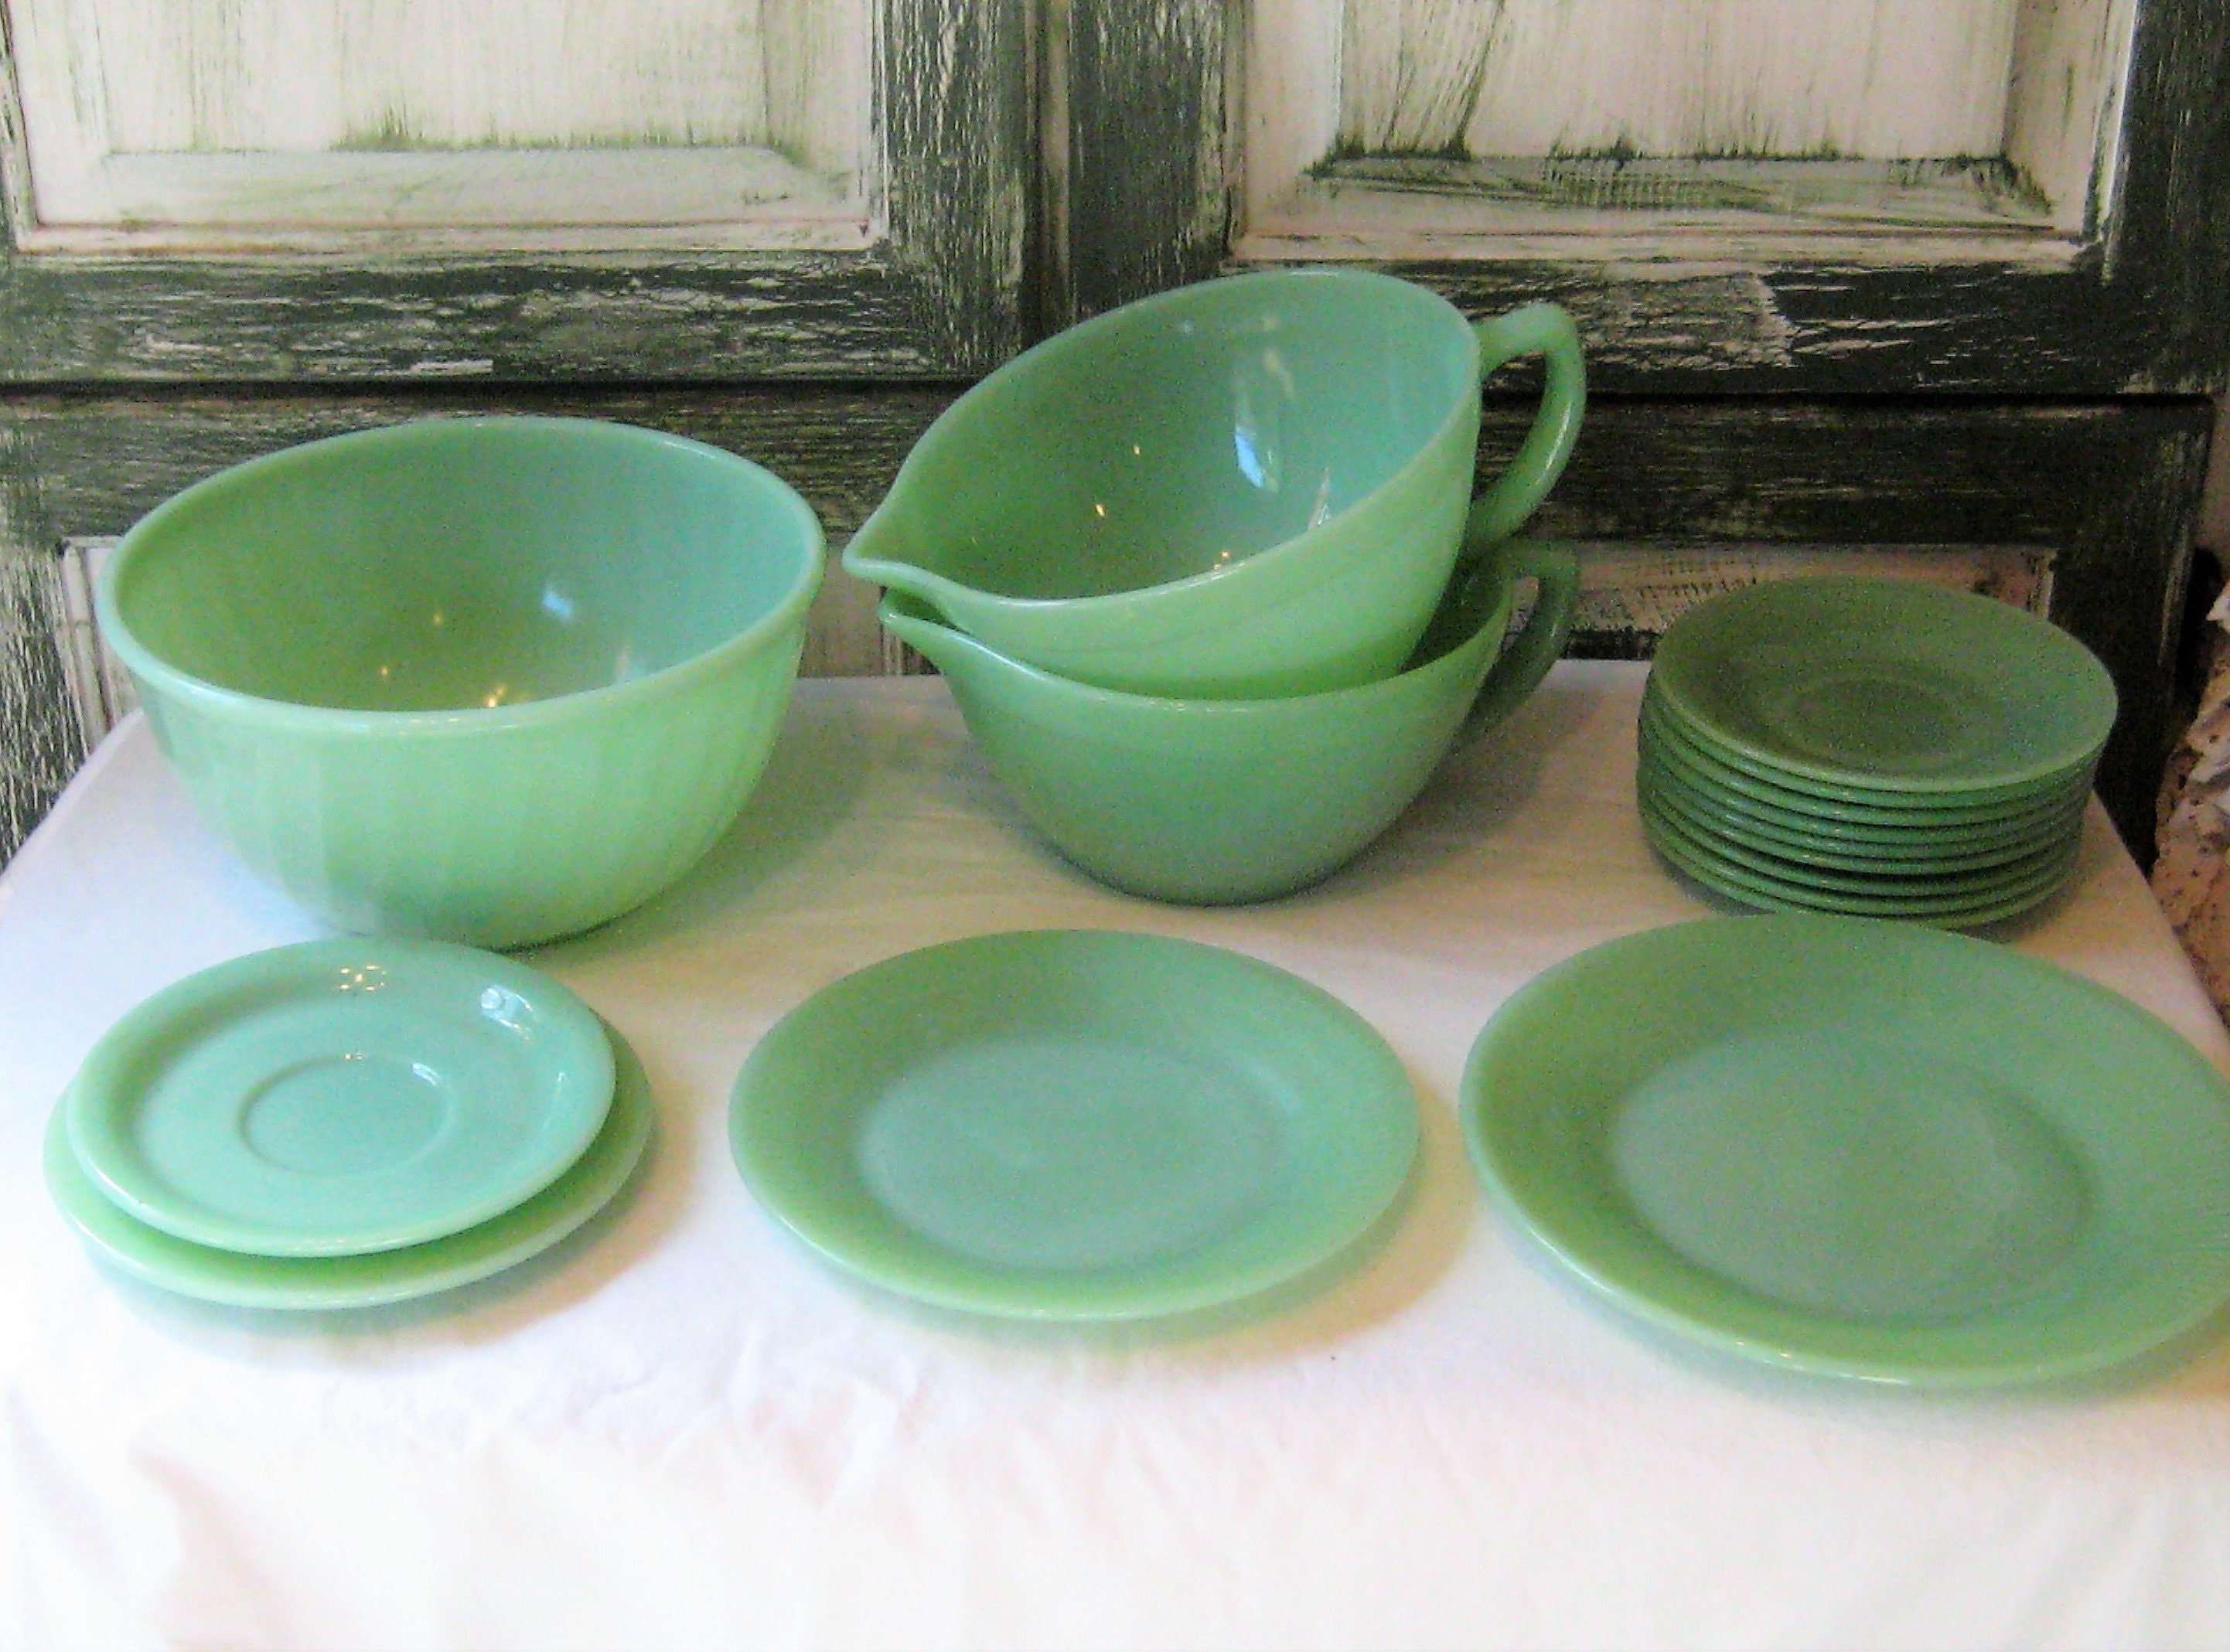 10 Pretty Jadeite Dishes & Accessories for Your Home